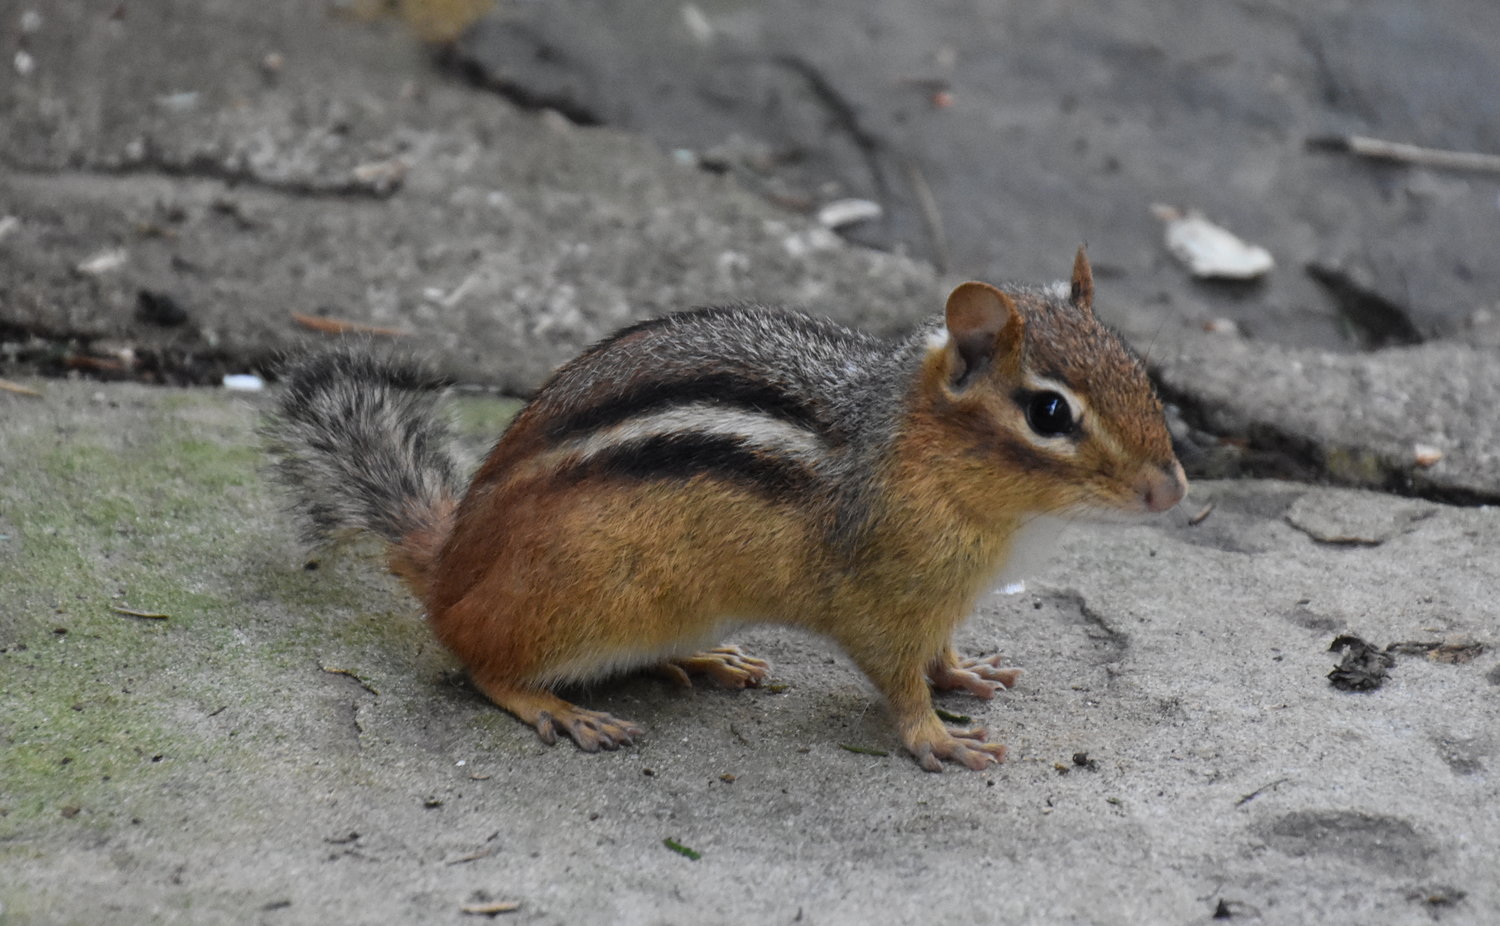 The Eastern chipmunk averages nine to 10 inches in length, including its tail. The fur is mostly tan- to cinnamon-colored, with swaths of gray, and there are black-and-white stripes running along its sides. This combination serves it well for the purposes of camouflage on the forest floor. Chipmunks are well adapted to woodland habitats, climbing trees with ease and navigating among rocks and stumps with great speed.